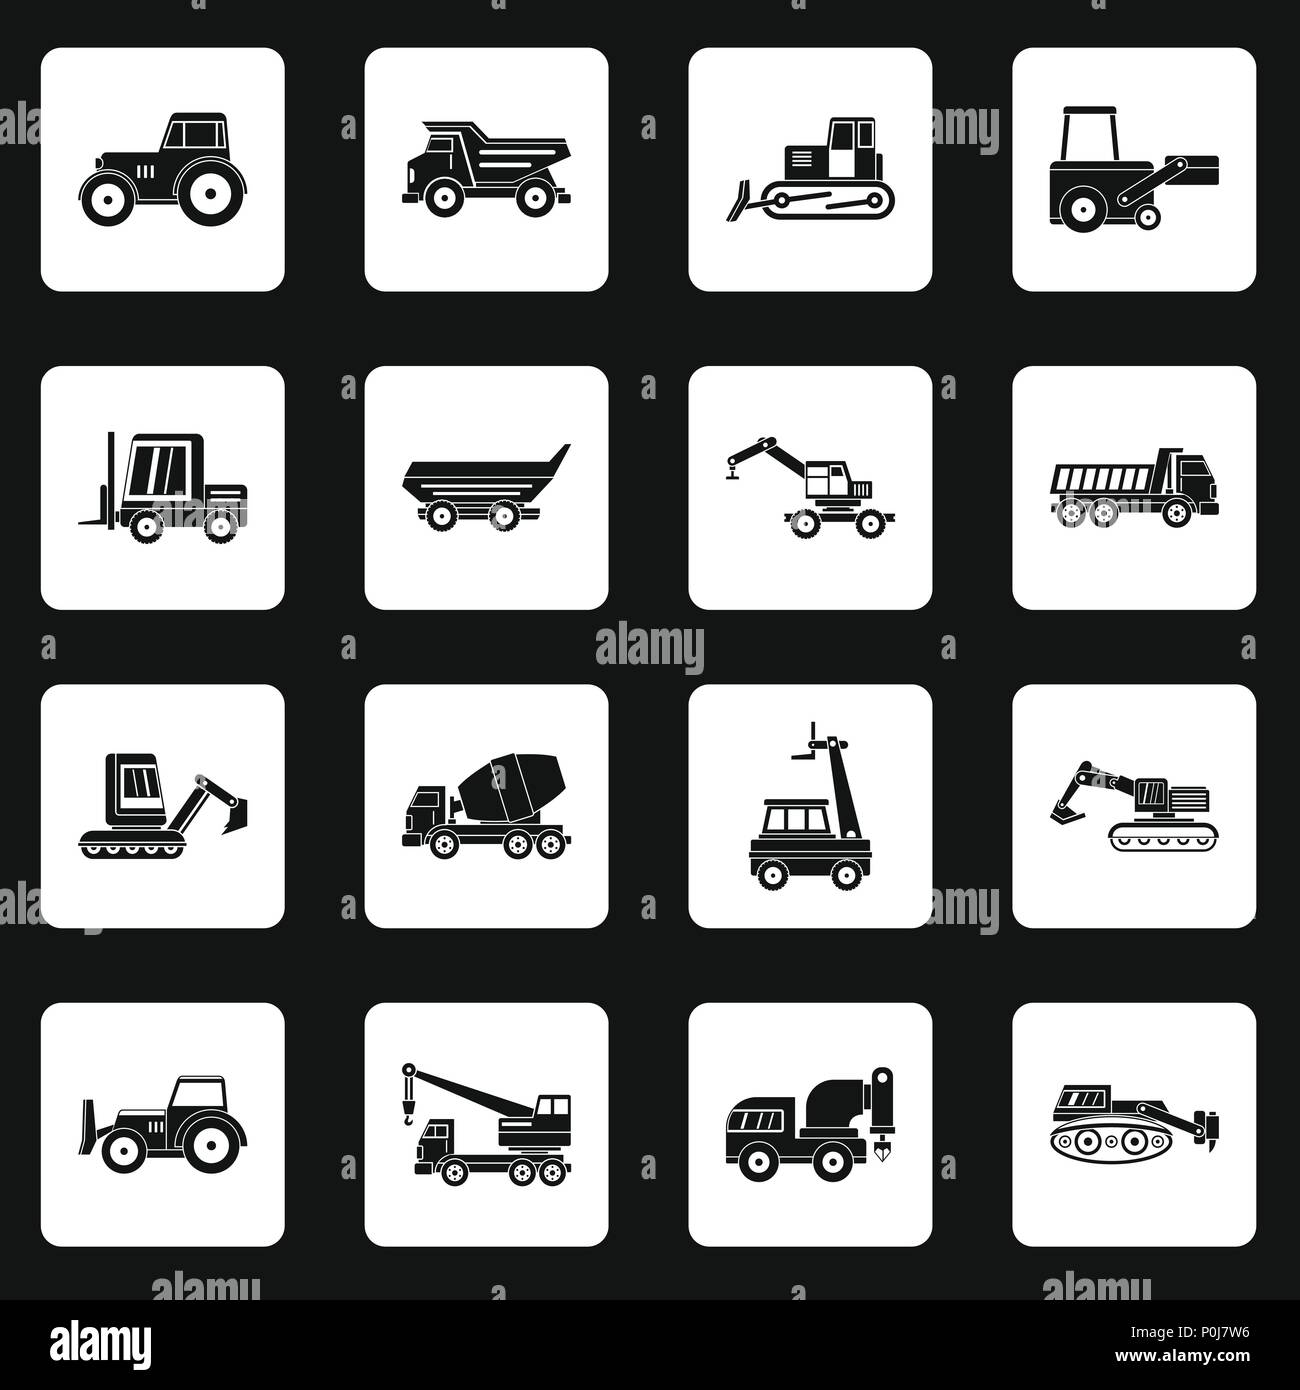 Building vehicles icons set squares vector Stock Vector